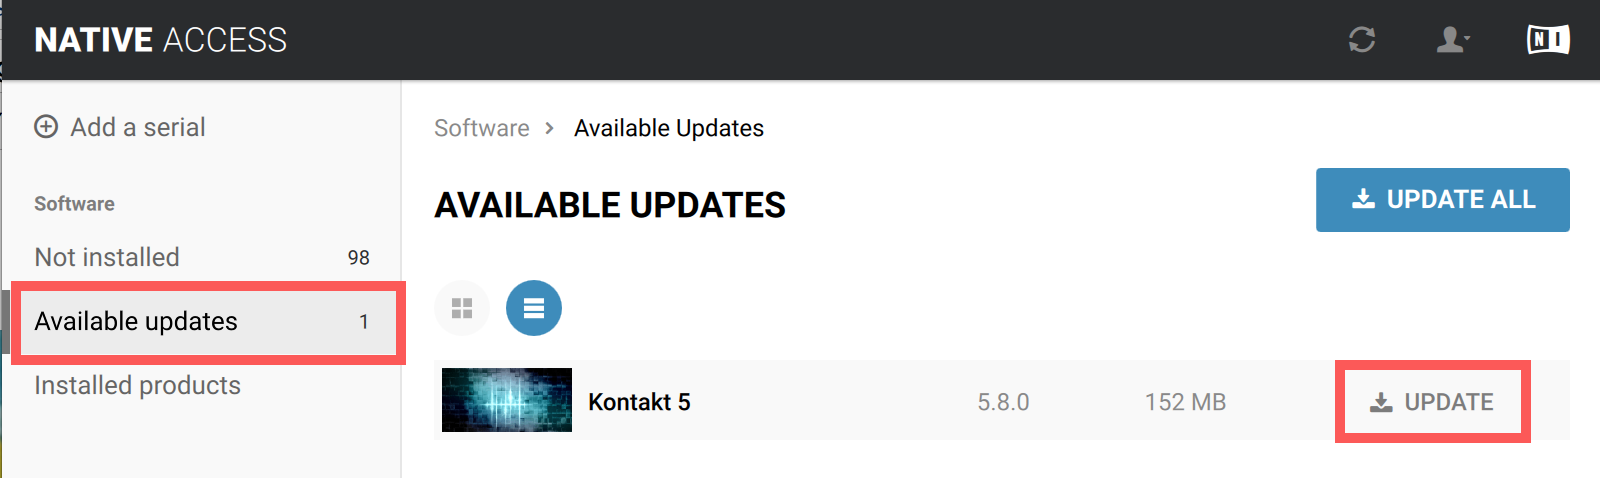 Kontakt_5_in_Available_Updates.png